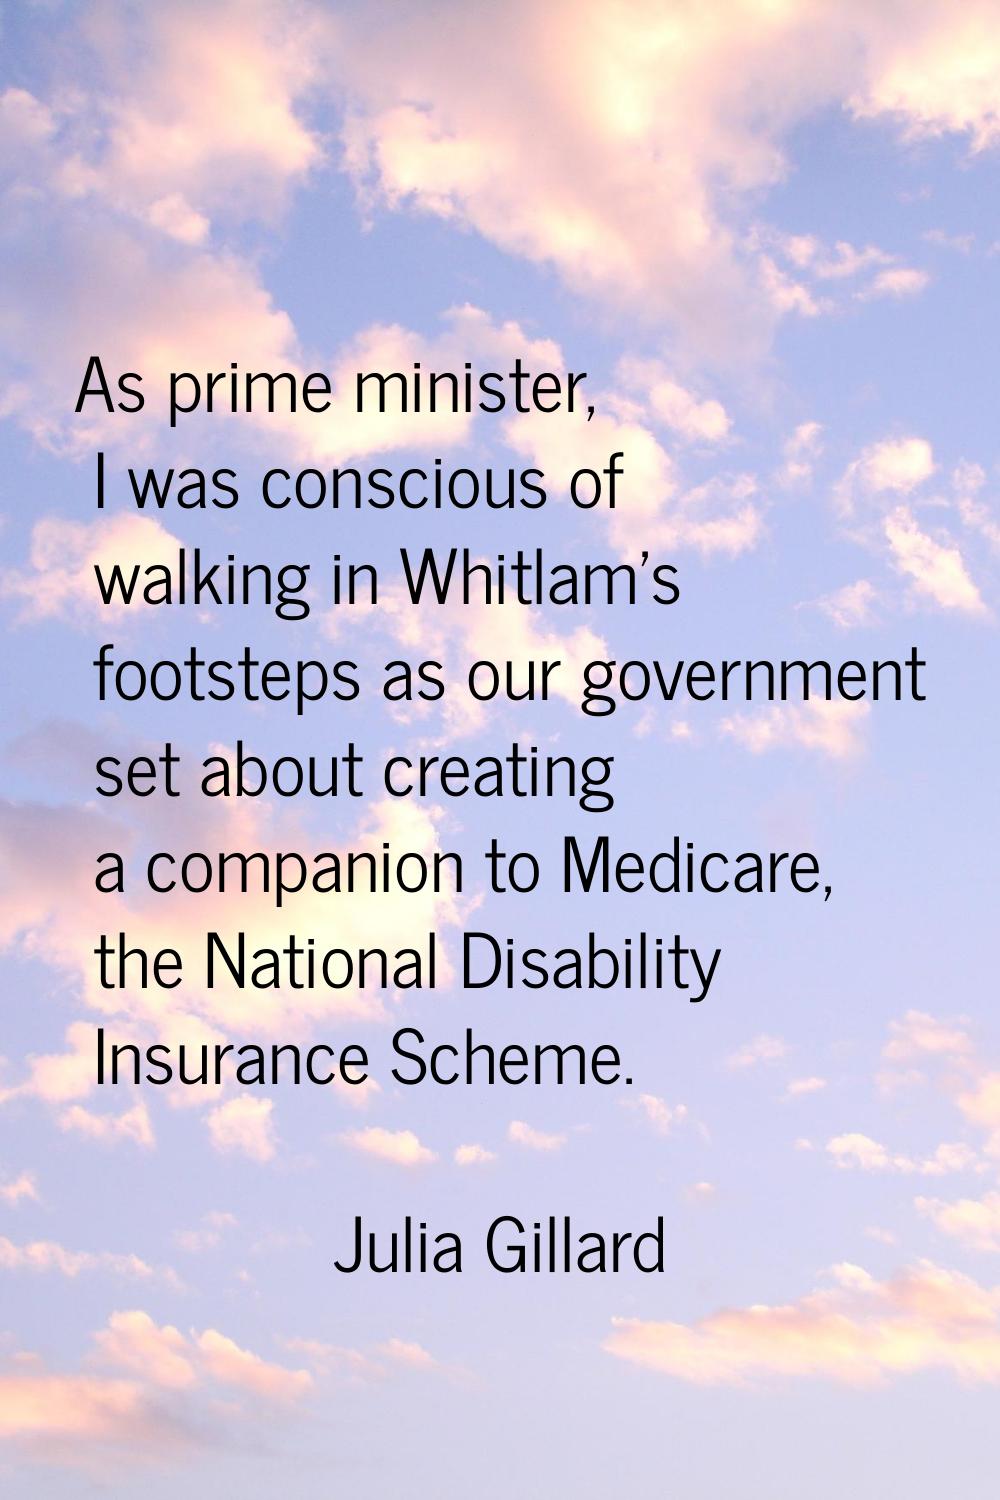 As prime minister, I was conscious of walking in Whitlam's footsteps as our government set about cr